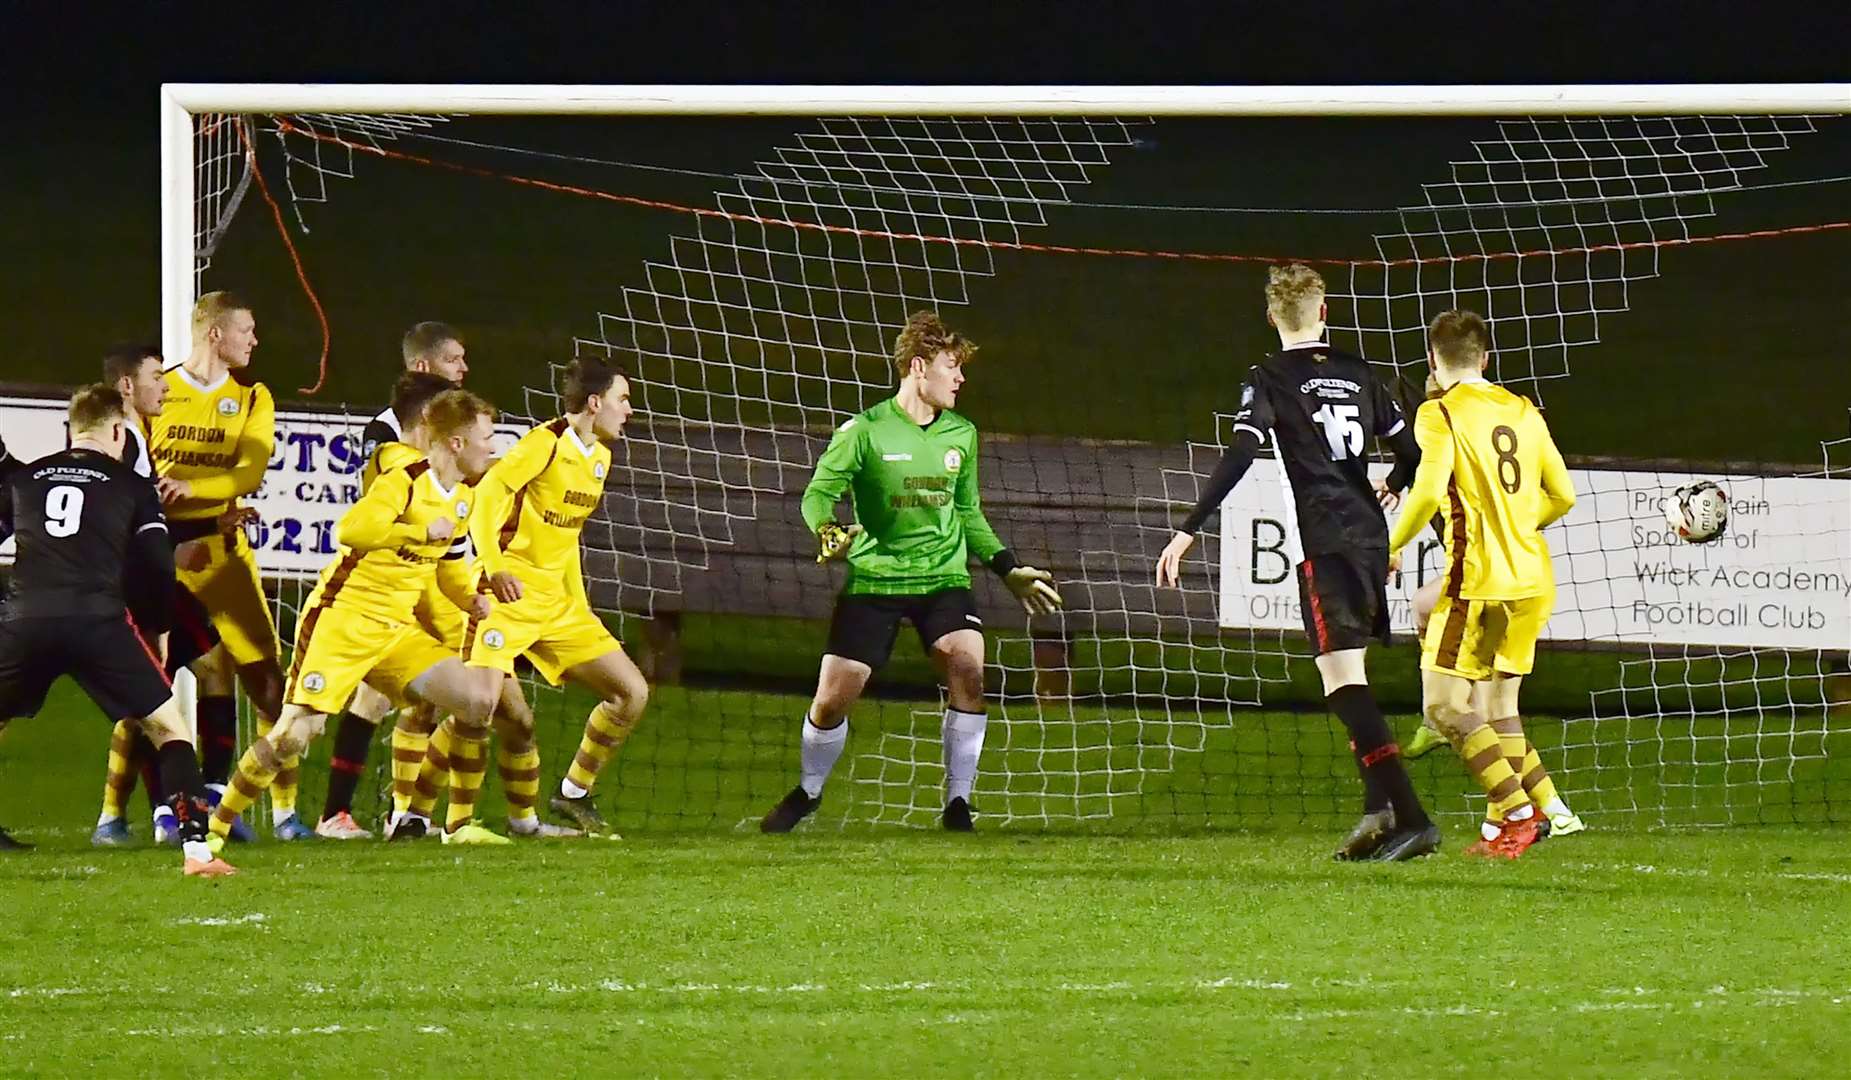 Ryan Campbell sees his shot go into the net for Wick Academy's opener against Forres Mechanics. Picture: Mel Roger